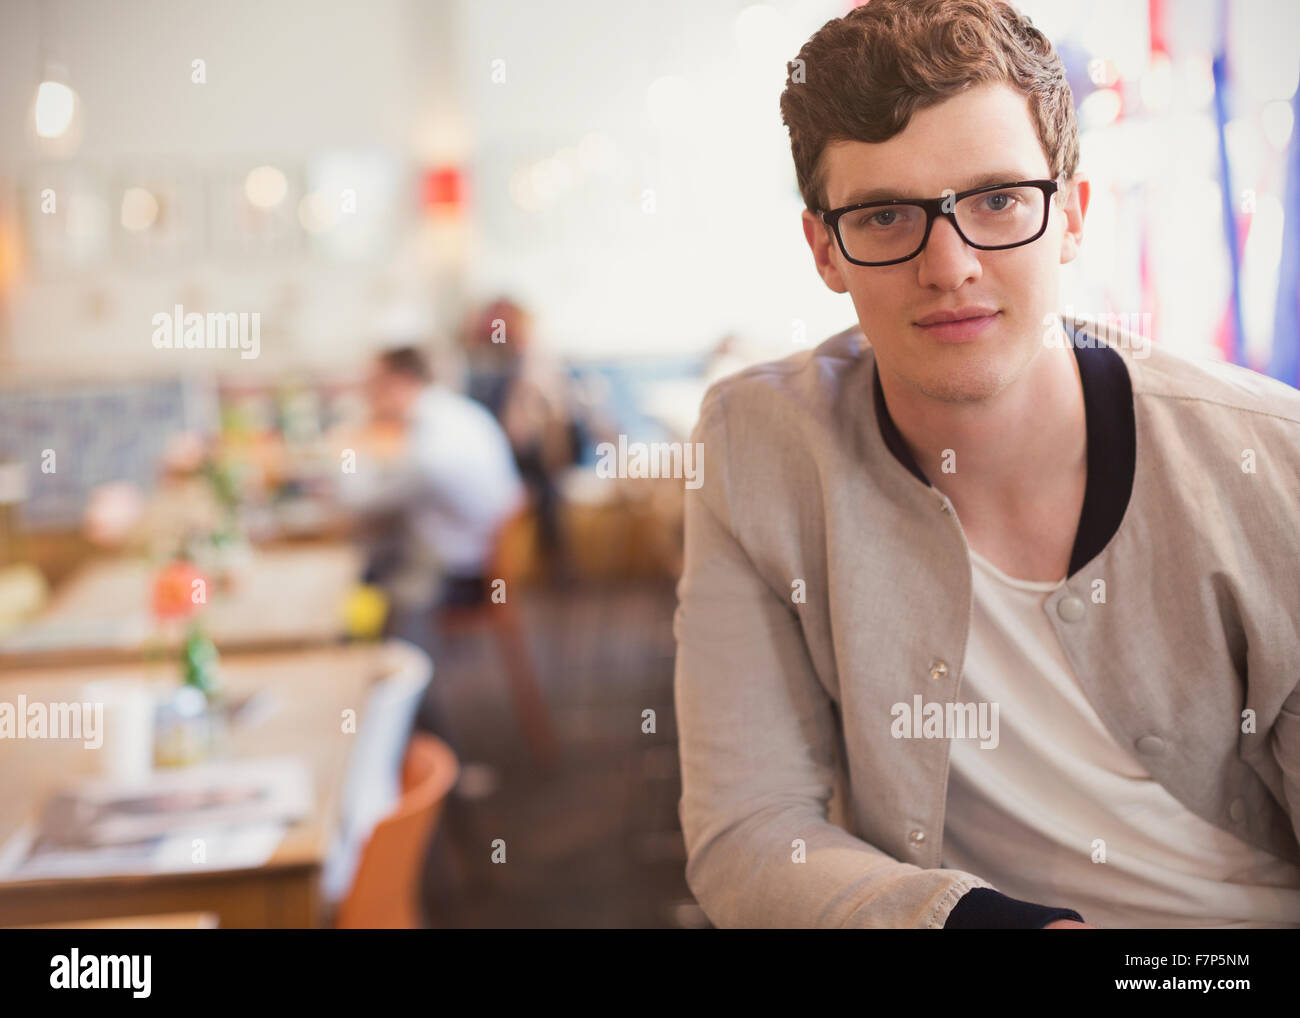 Portrait confident man with eyeglasses in cafe Stock Photo